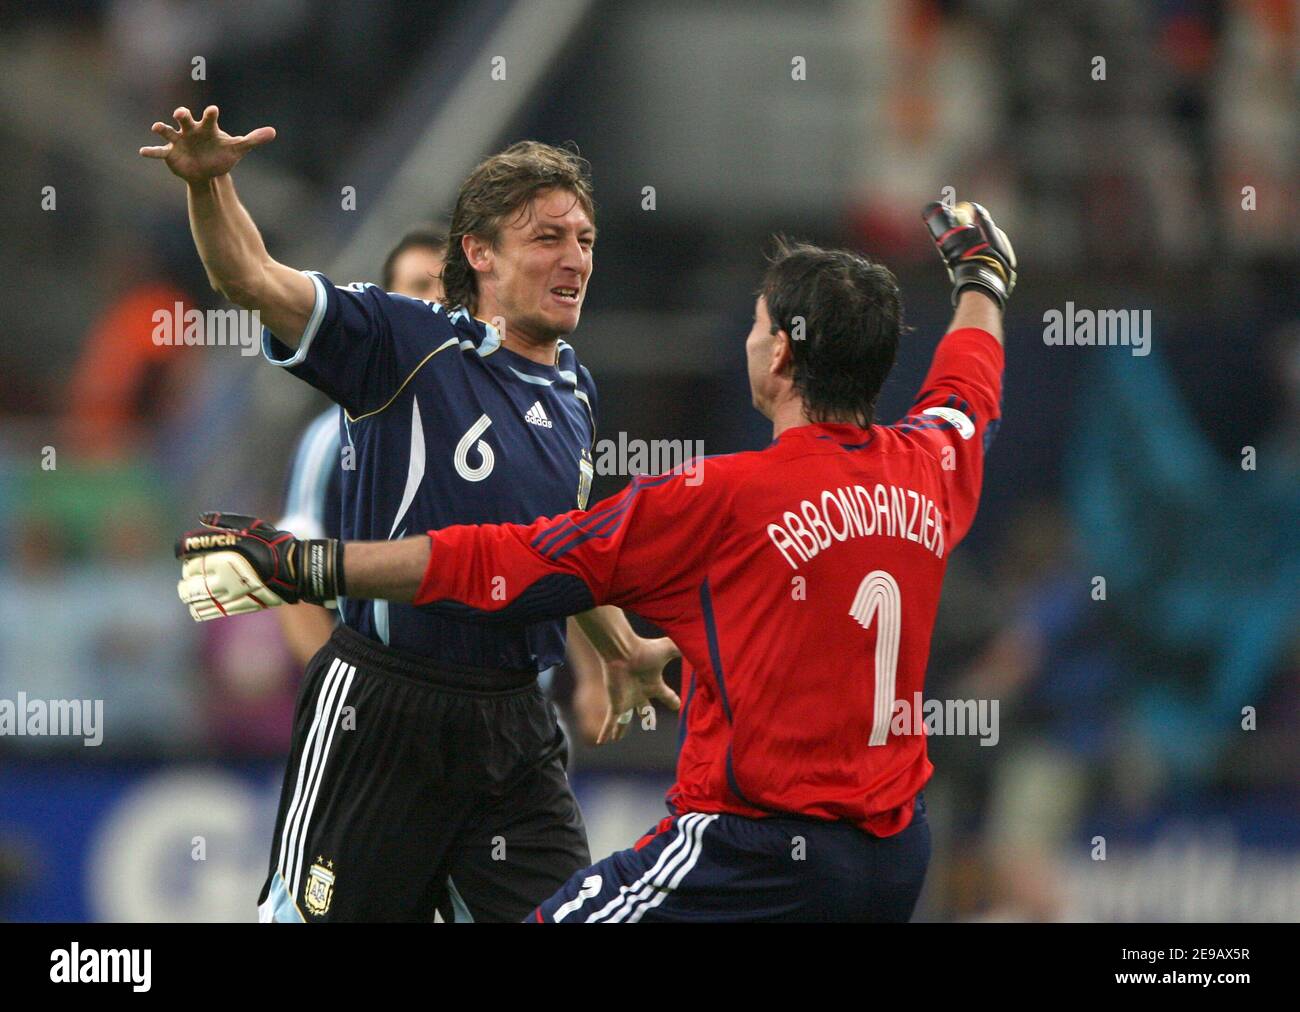 Argentina's Roberto Abbondanzieri and Gabriel Heinze celebrate the victory during the World Cup 2006, Group C Argentina vs Serbia Montenegro, in Gelsenkirchen, Germany, on June 16, 2006. Argentina won 6-0. Photo by Gouhier-Hahn-Orban/Cameleon/ABACAPRESS.COM Stock Photo